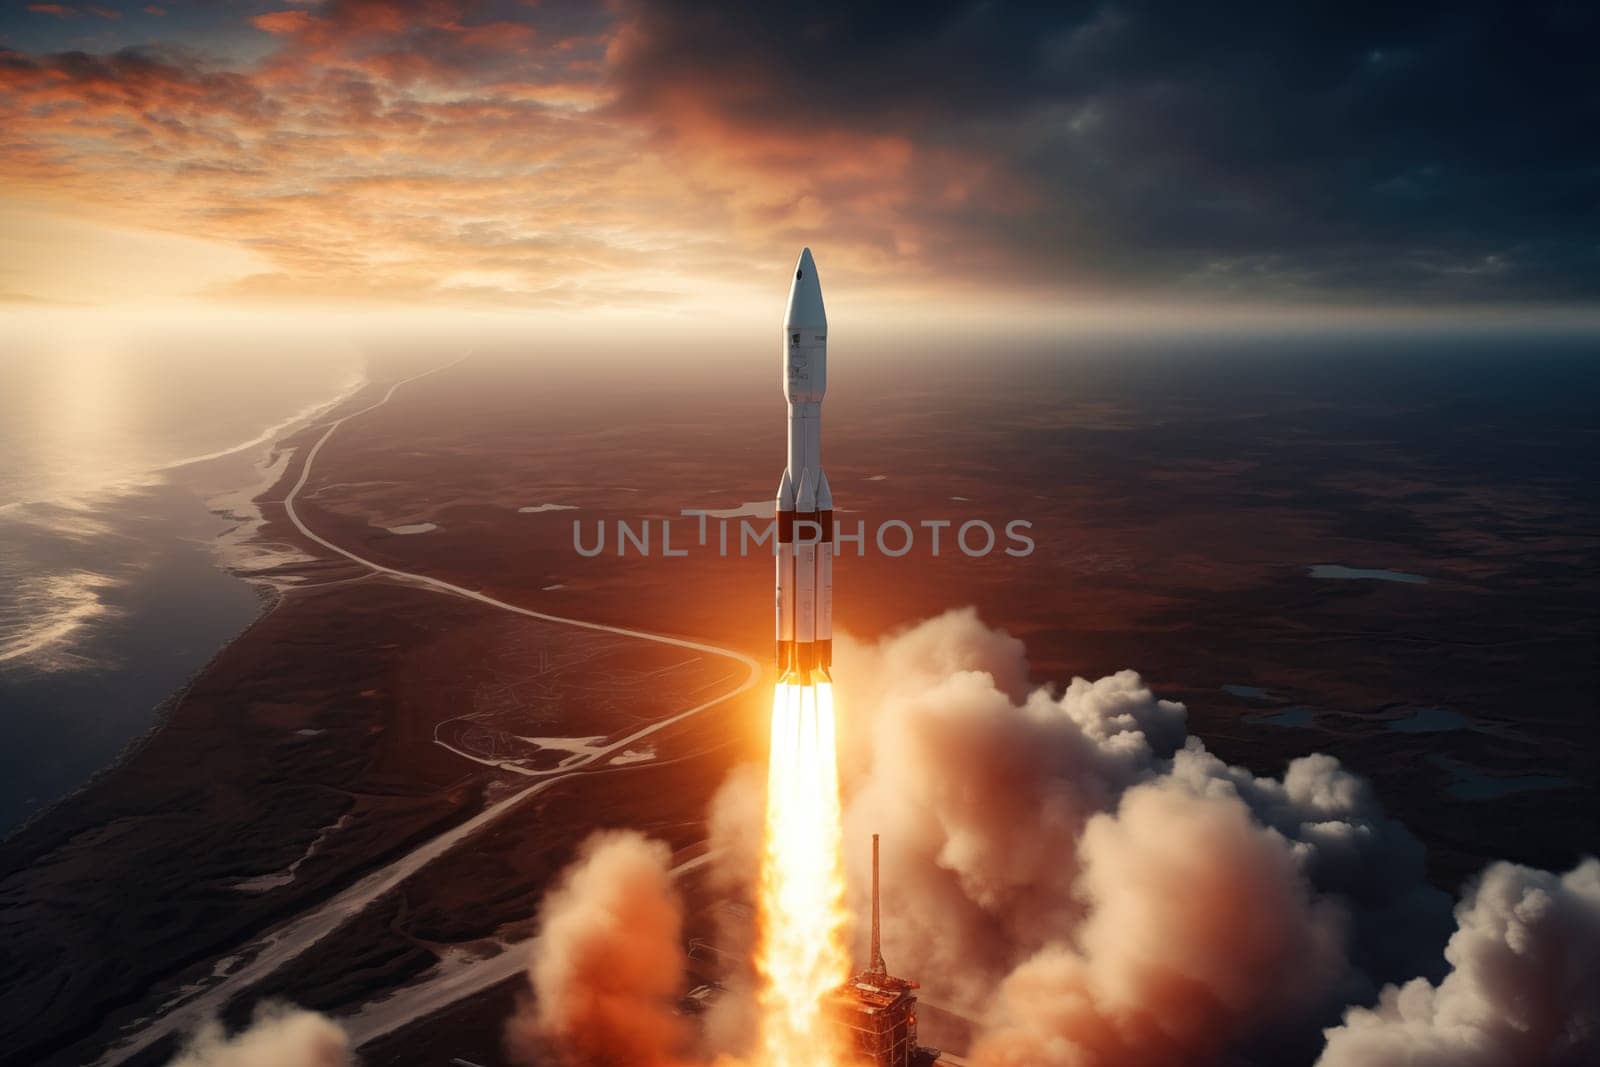 Aerial view of a rocket launch at sunrise sunset over an ocean coast. The rocket is blasting off with a trail of smoke and flames behind it.